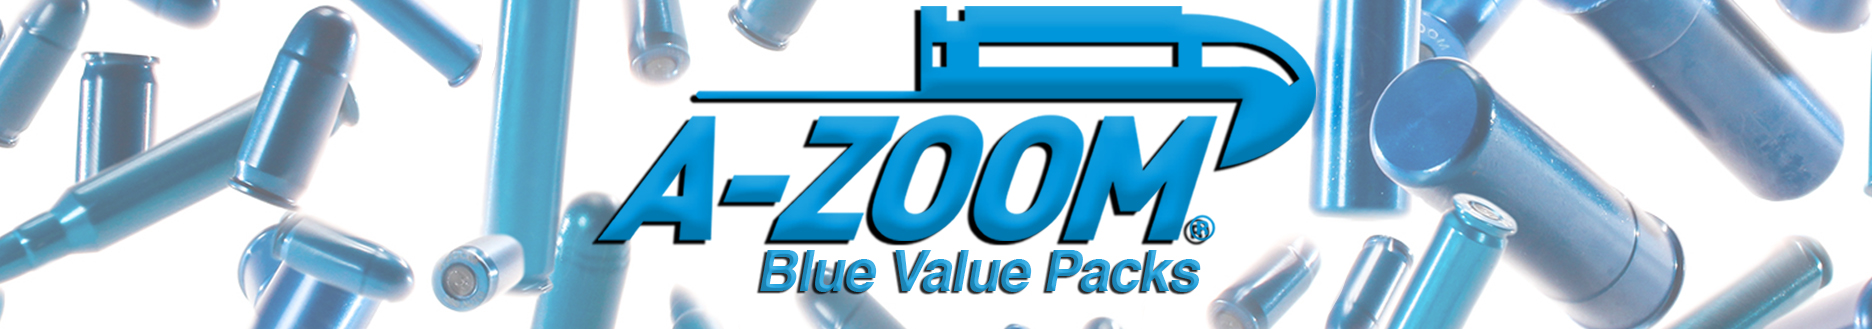 A-Zoom Blue Training Rounds